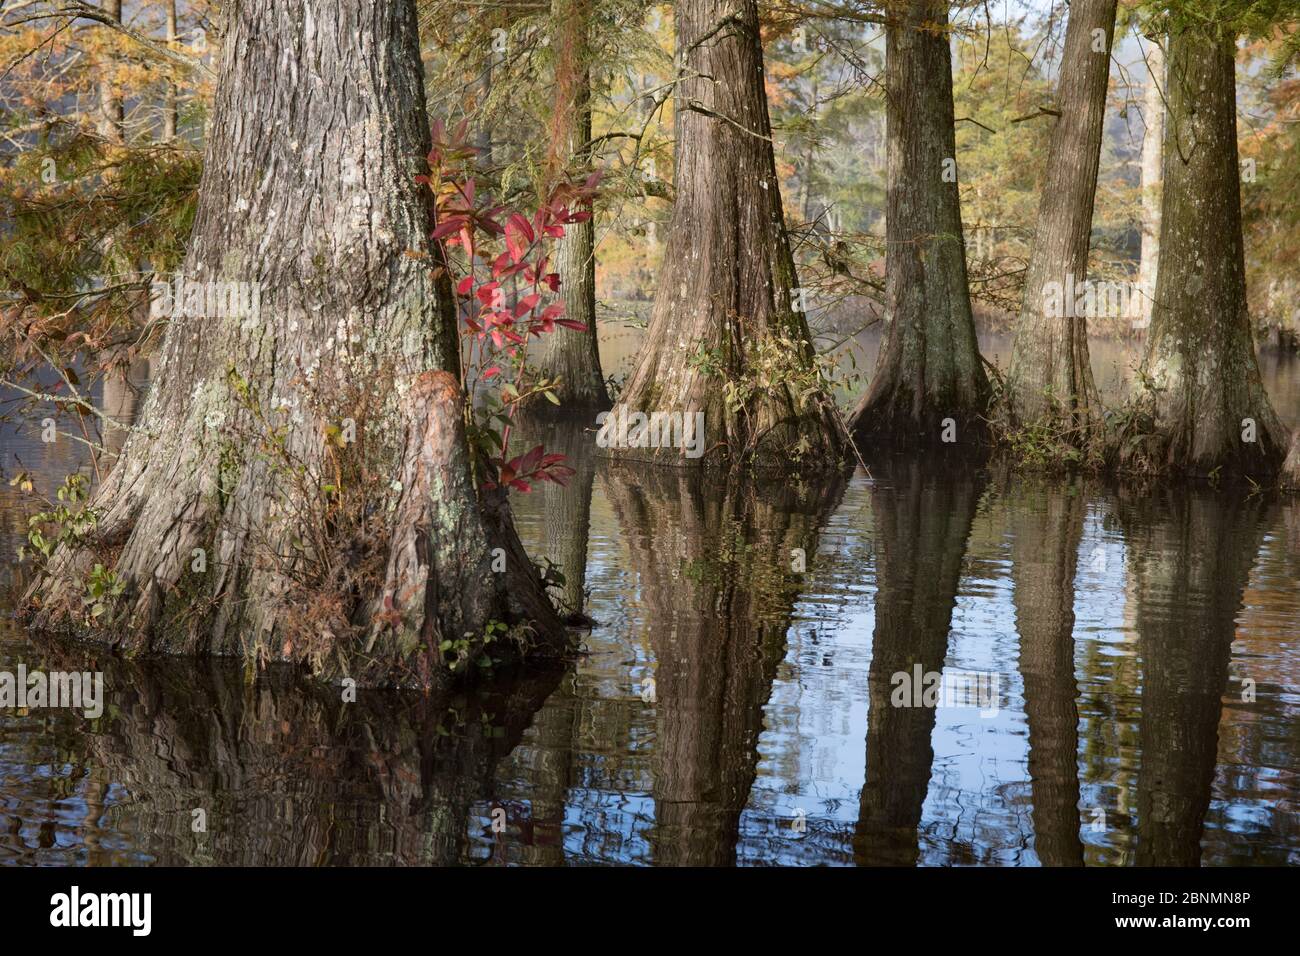 Bald cypress (Taxodium distichum) in pond, at north end of cypress range, Trap Pond State Park, Delaware, USA Stock Photo